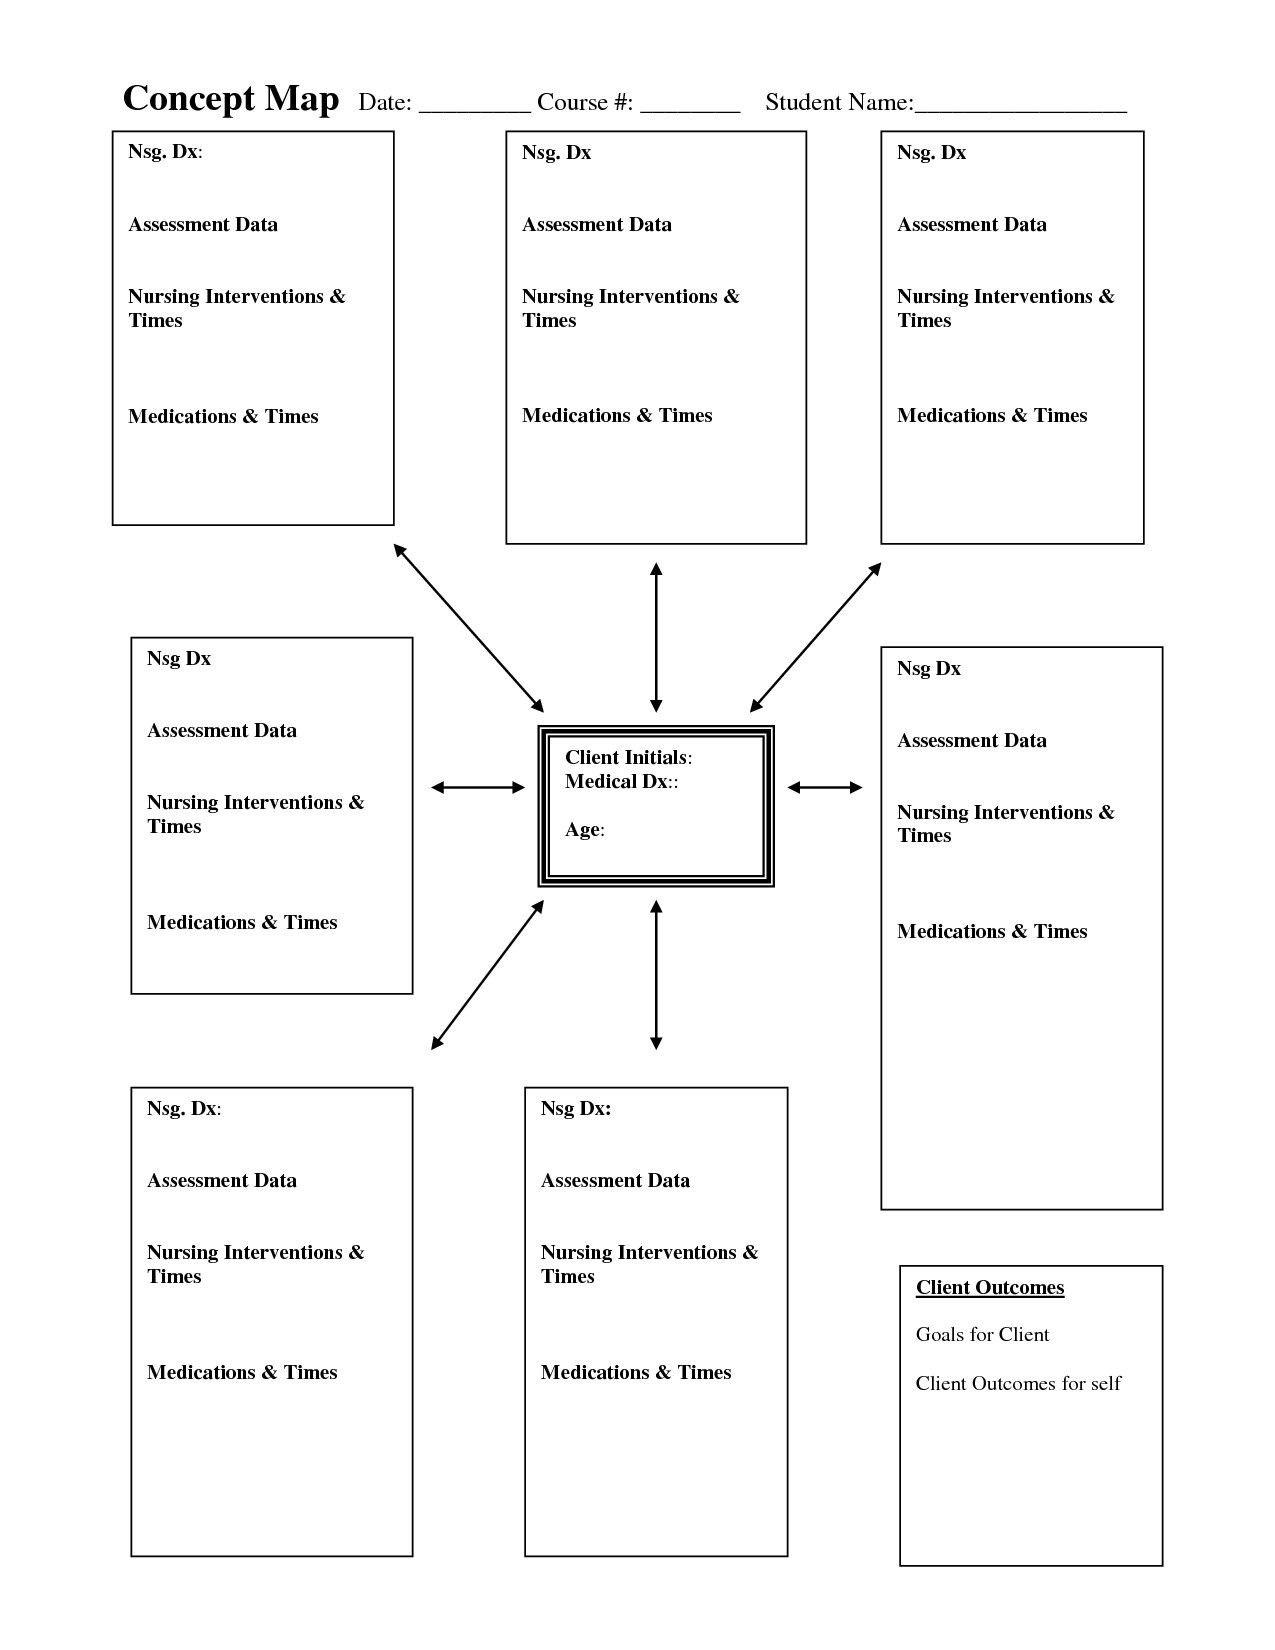 Skills Worksheet Concept Mapping Answers  Briefencounters Or Skills Worksheet Concept Mapping Answers